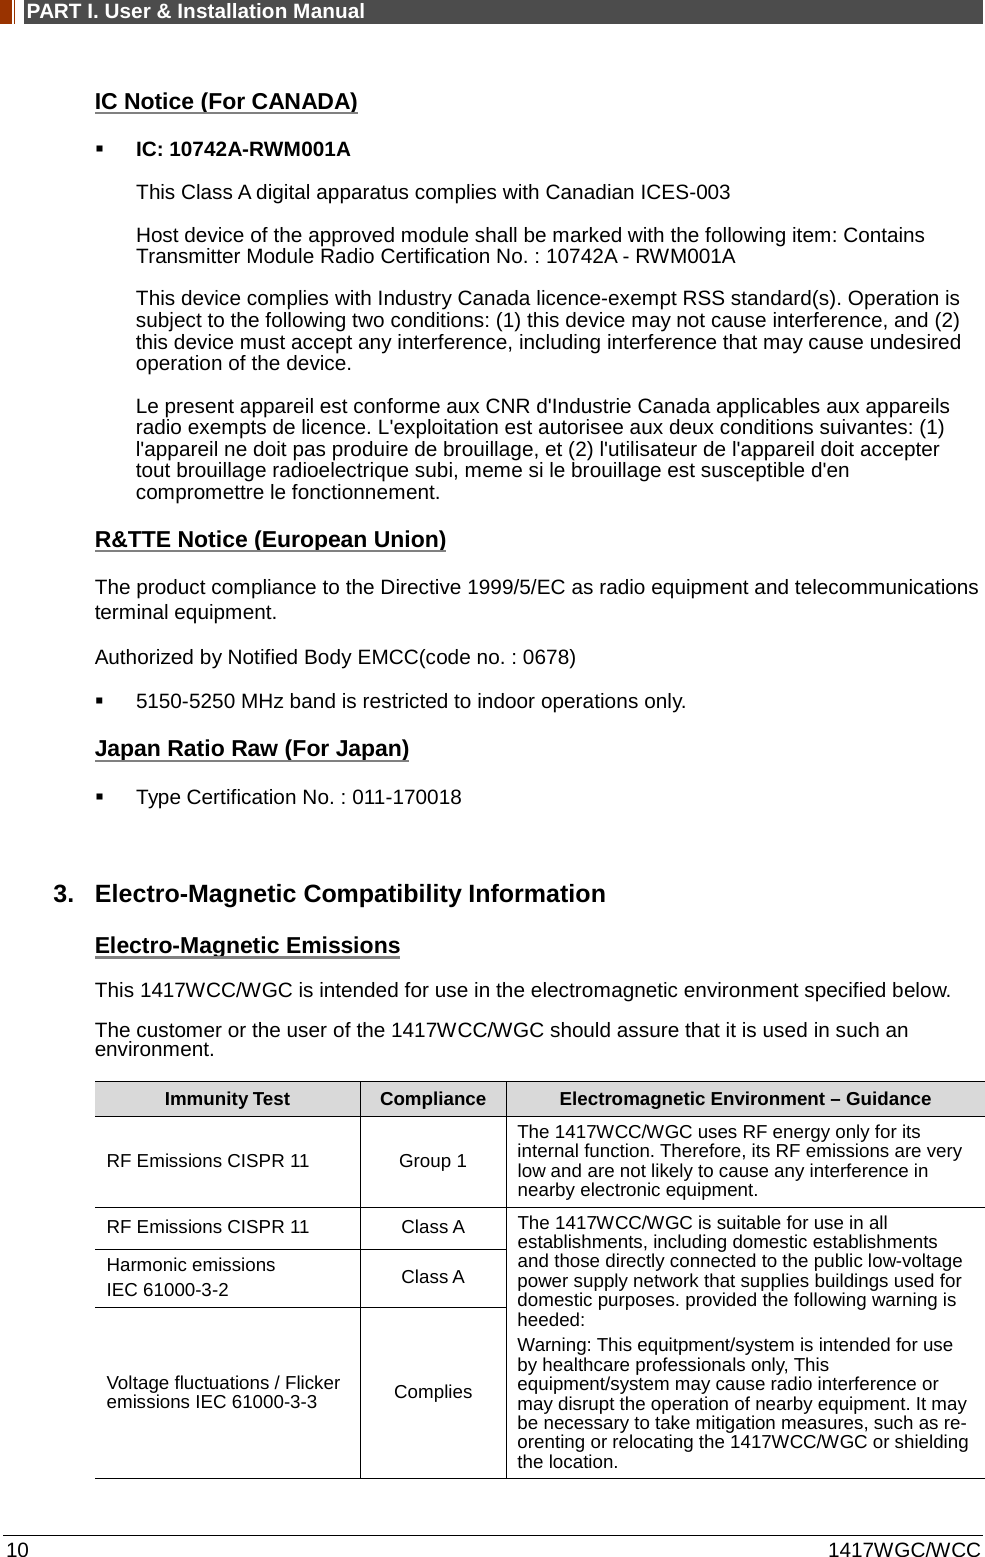 PART I. User &amp; Installation Manual 10 1417WGC/WCC IC Notice (For CANADA)  IC: 10742A-RWM001A This Class A digital apparatus complies with Canadian ICES-003 Host device of the approved module shall be marked with the following item: Contains Transmitter Module Radio Certification No. : 10742A - RWM001A This device complies with Industry Canada licence-exempt RSS standard(s). Operation is subject to the following two conditions: (1) this device may not cause interference, and (2) this device must accept any interference, including interference that may cause undesired operation of the device. Le present appareil est conforme aux CNR d&apos;Industrie Canada applicables aux appareils radio exempts de licence. L&apos;exploitation est autorisee aux deux conditions suivantes: (1) l&apos;appareil ne doit pas produire de brouillage, et (2) l&apos;utilisateur de l&apos;appareil doit accepter tout brouillage radioelectrique subi, meme si le brouillage est susceptible d&apos;en compromettre le fonctionnement. R&amp;TTE Notice (European Union) The product compliance to the Directive 1999/5/EC as radio equipment and telecommunications terminal equipment. Authorized by Notified Body EMCC(code no. : 0678)  5150-5250 MHz band is restricted to indoor operations only. Japan Ratio Raw (For Japan)  Type Certification No. : 011-170018  3. Electro-Magnetic Compatibility Information Electro-Magnetic Emissions This 1417WCC/WGC is intended for use in the electromagnetic environment specified below. The customer or the user of the 1417WCC/WGC should assure that it is used in such an environment. Immunity Test Compliance Electromagnetic Environment – Guidance RF Emissions CISPR 11 Group 1 The 1417WCC/WGC uses RF energy only for its internal function. Therefore, its RF emissions are very low and are not likely to cause any interference in nearby electronic equipment. RF Emissions CISPR 11 Class A The 1417WCC/WGC is suitable for use in all establishments, including domestic establishments and those directly connected to the public low-voltage power supply network that supplies buildings used for domestic purposes. provided the following warning is heeded: Warning: This equitpment/system is intended for use by healthcare professionals only, This equipment/system may cause radio interference or may disrupt the operation of nearby equipment. It may be necessary to take mitigation measures, such as re-orenting or relocating the 1417WCC/WGC or shielding the location. Harmonic emissions IEC 61000-3-2  Class A Voltage fluctuations / Flicker emissions IEC 61000-3-3  Complies 